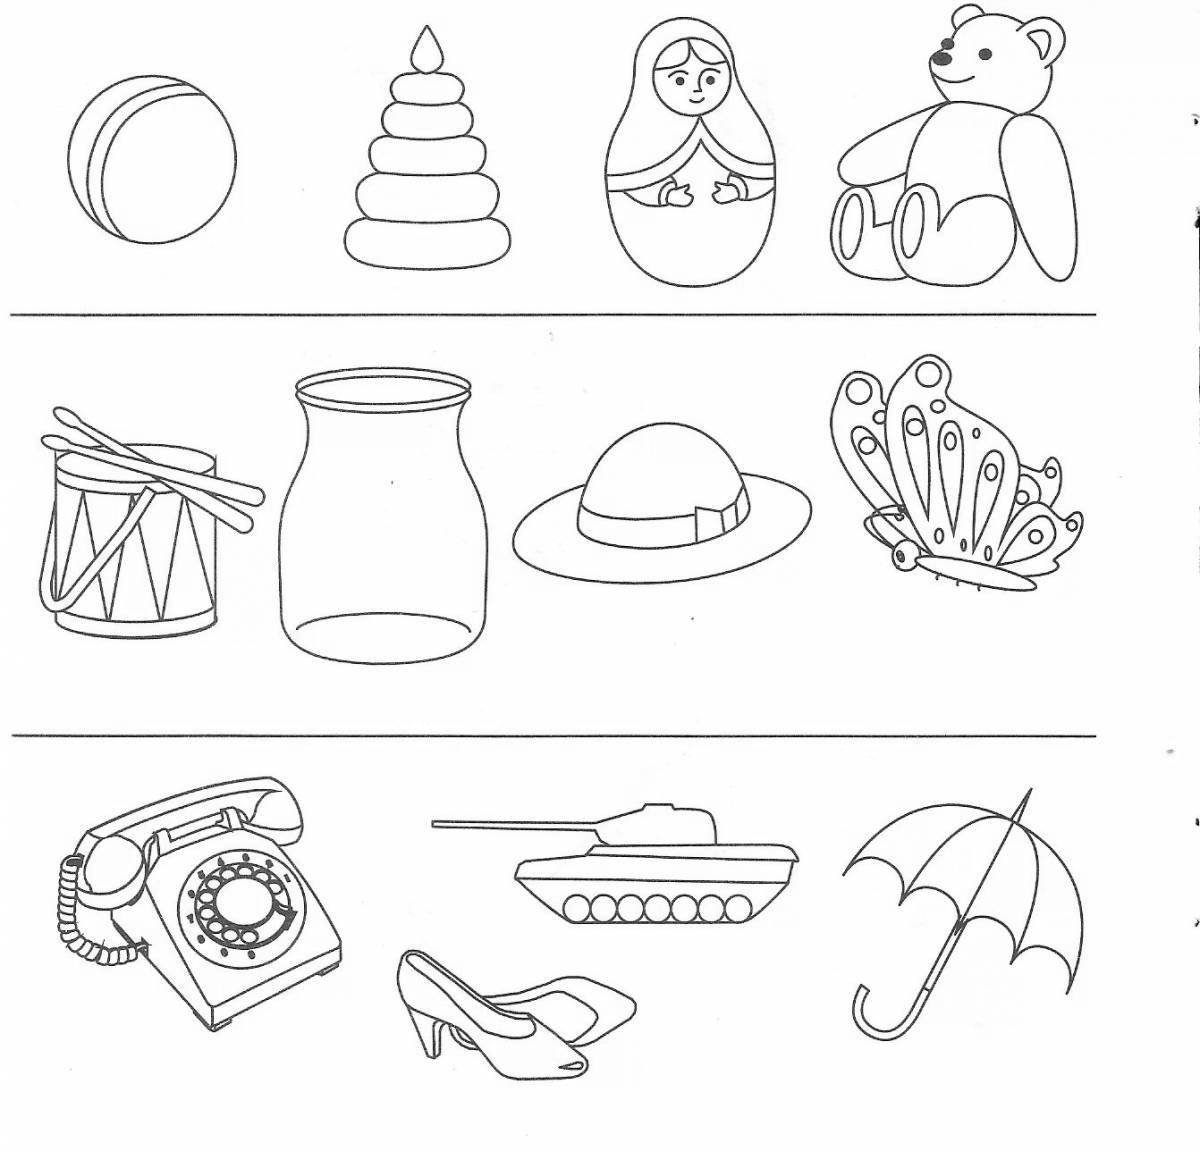 Playful coloring pages